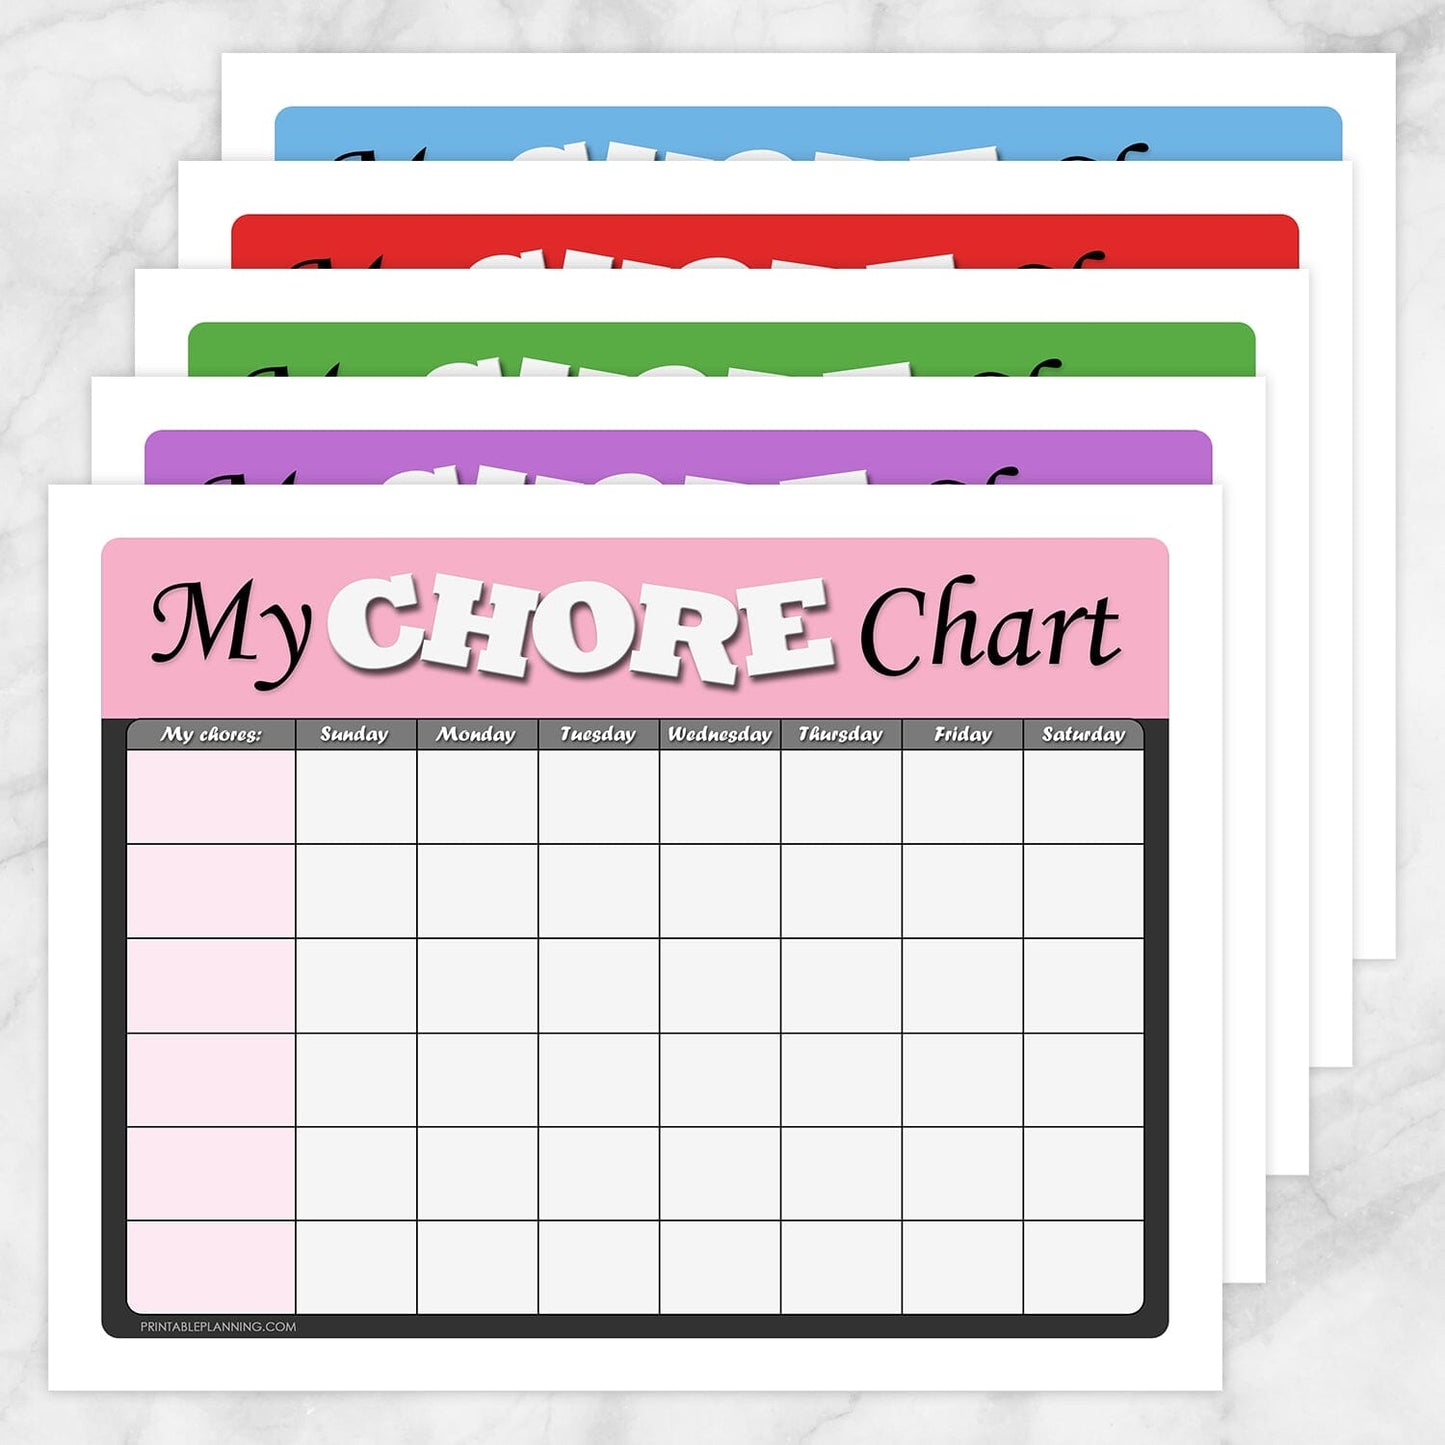 Printable Kids Chore Chart BUNDLE - 'My Chore Chart' Weekly Page in 5 Colors at Printable Planning.